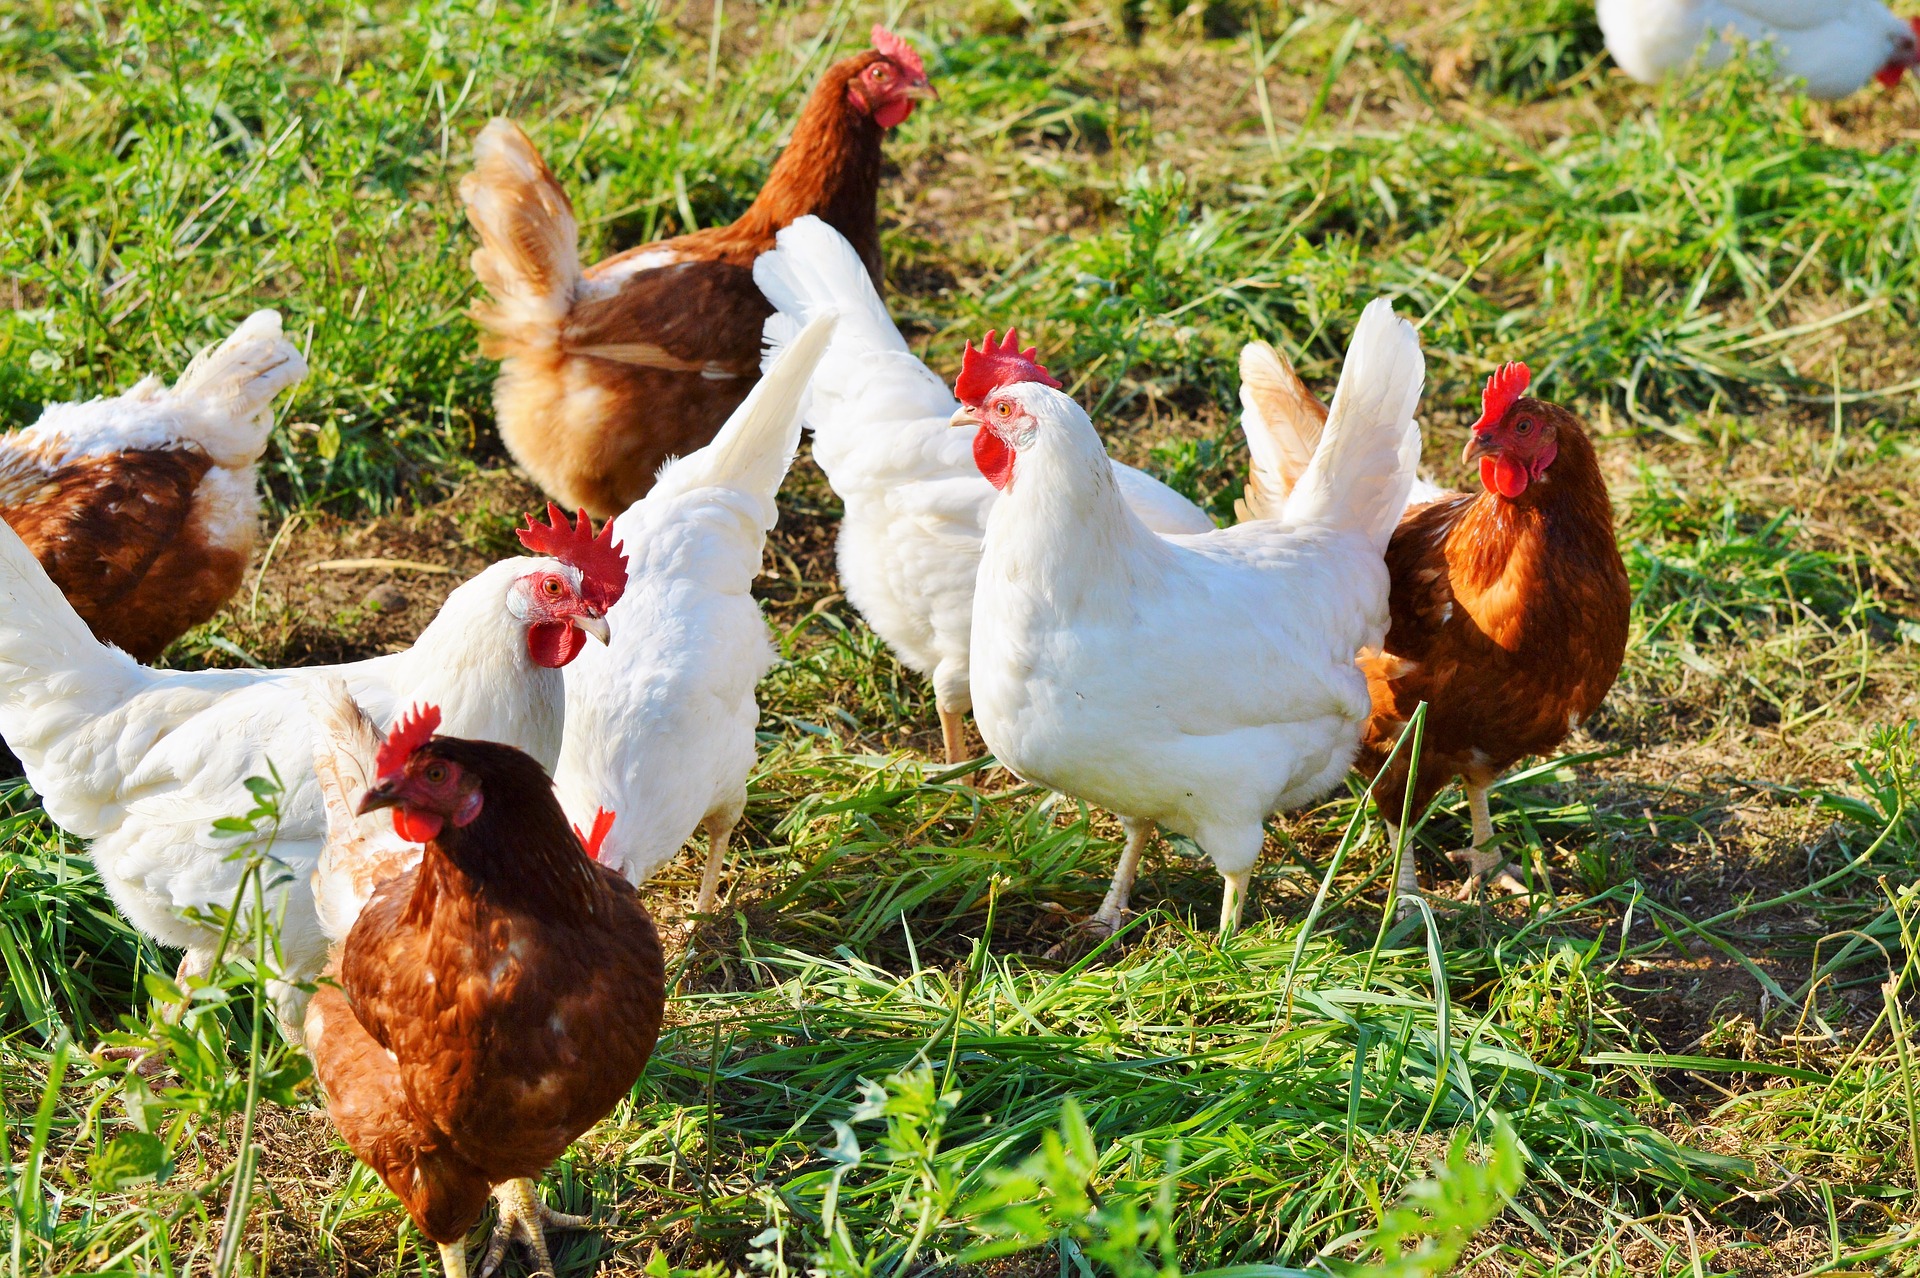 Poultry farmers should monitor for signs of HPAI and practice good biosecurity. (Pixabay photo)